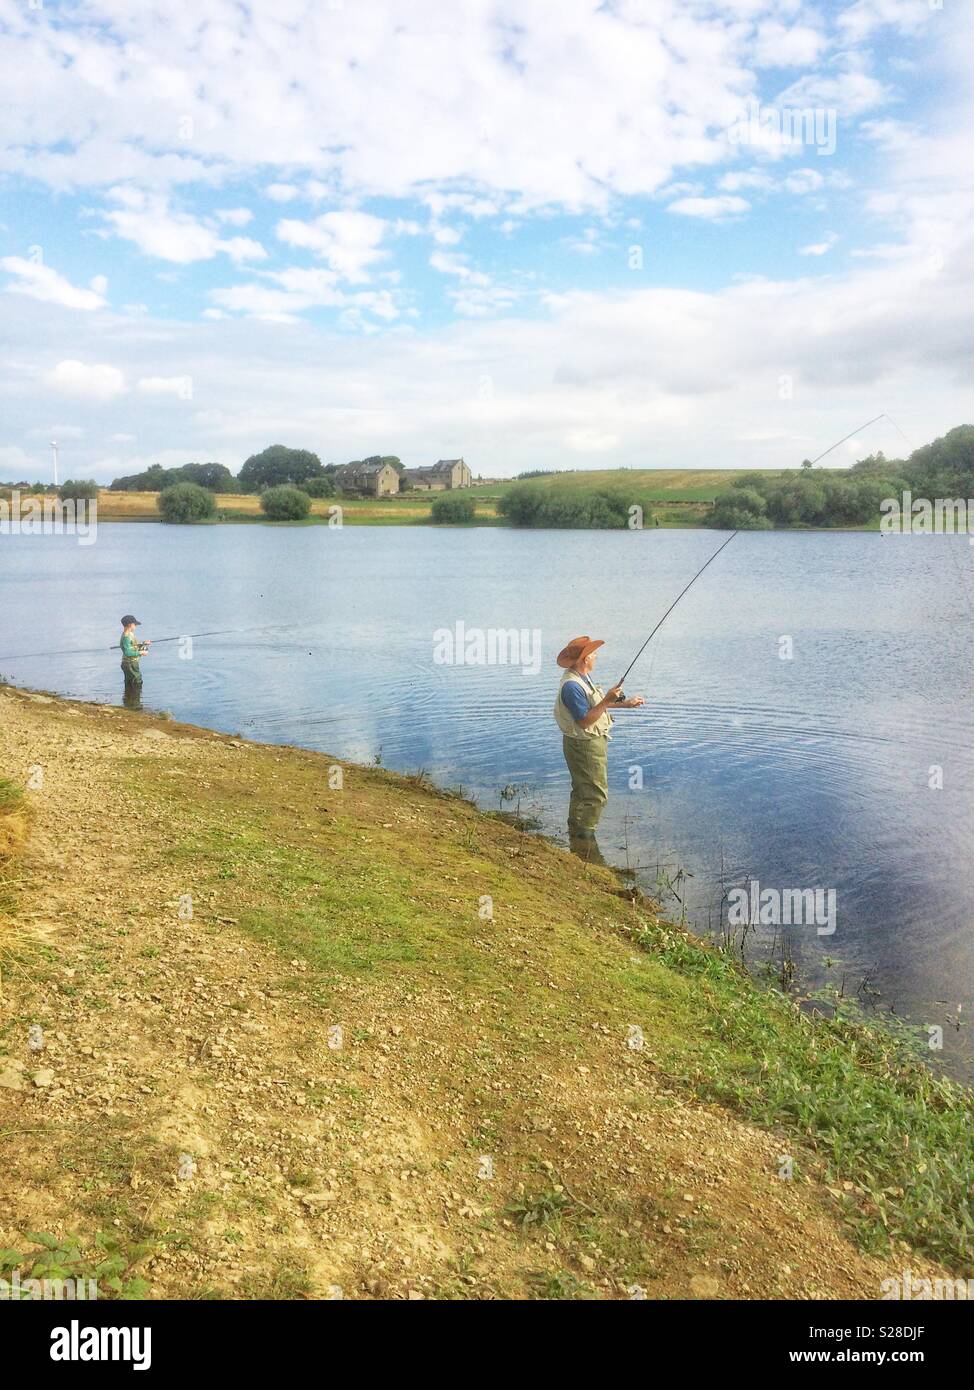 https://c8.alamy.com/comp/S28DJF/boy-and-his-grandfather-fishing-for-trout-at-scout-dike-reservoir-pennistone-south-yorkshire-england-S28DJF.jpg